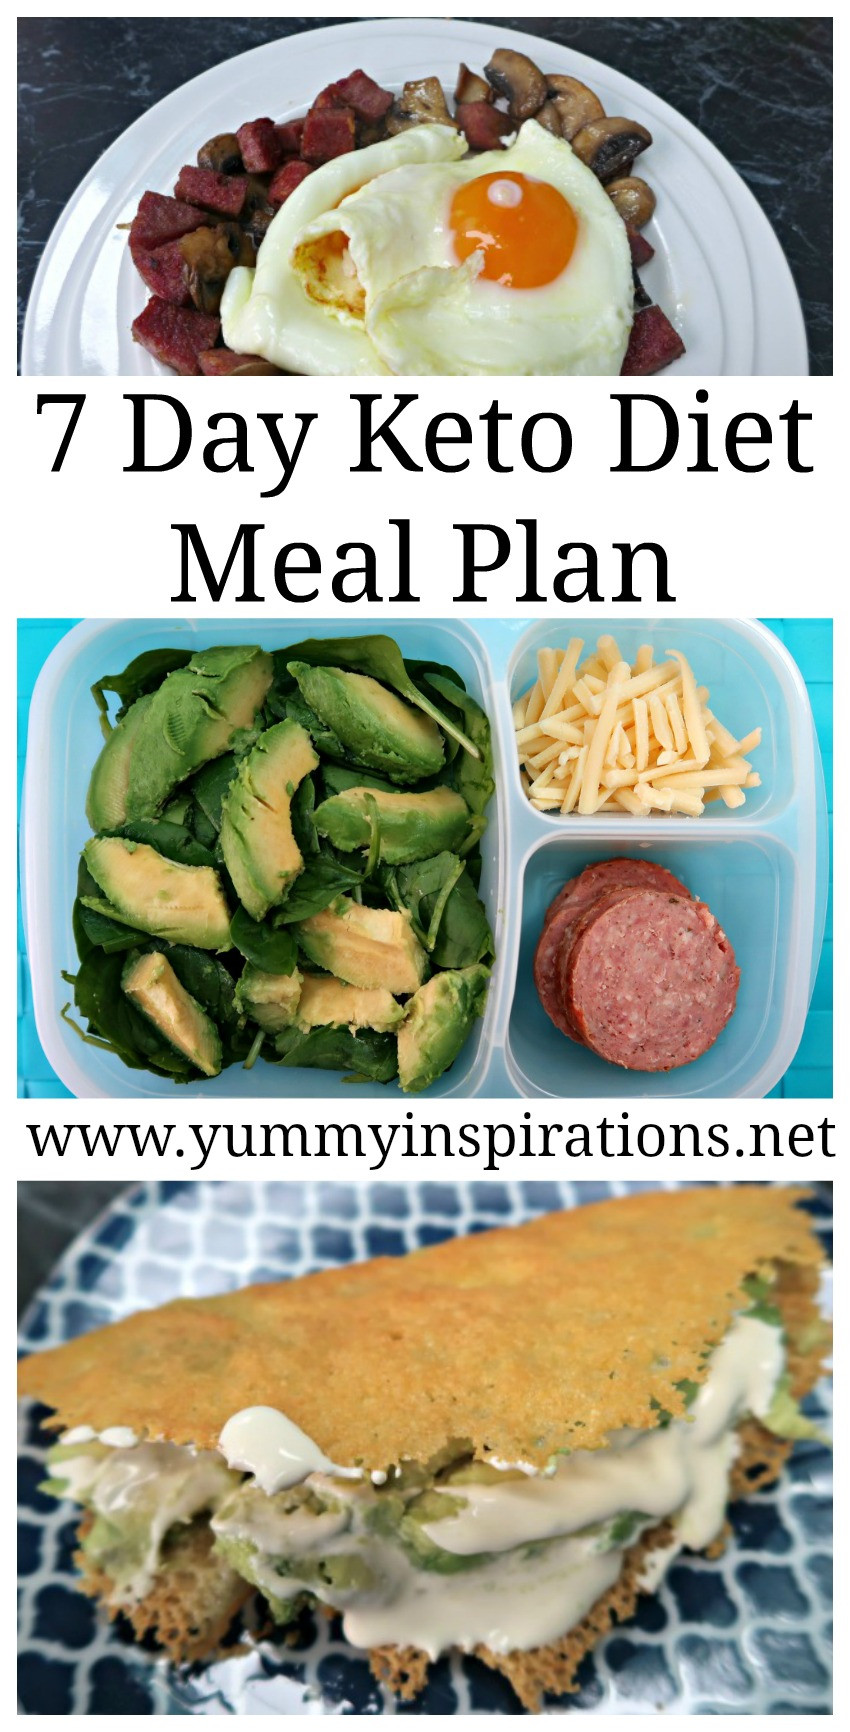 Keto Diet Food
 7 Day Keto Diet Meal Plan Menu For Weight Loss Ketogenic